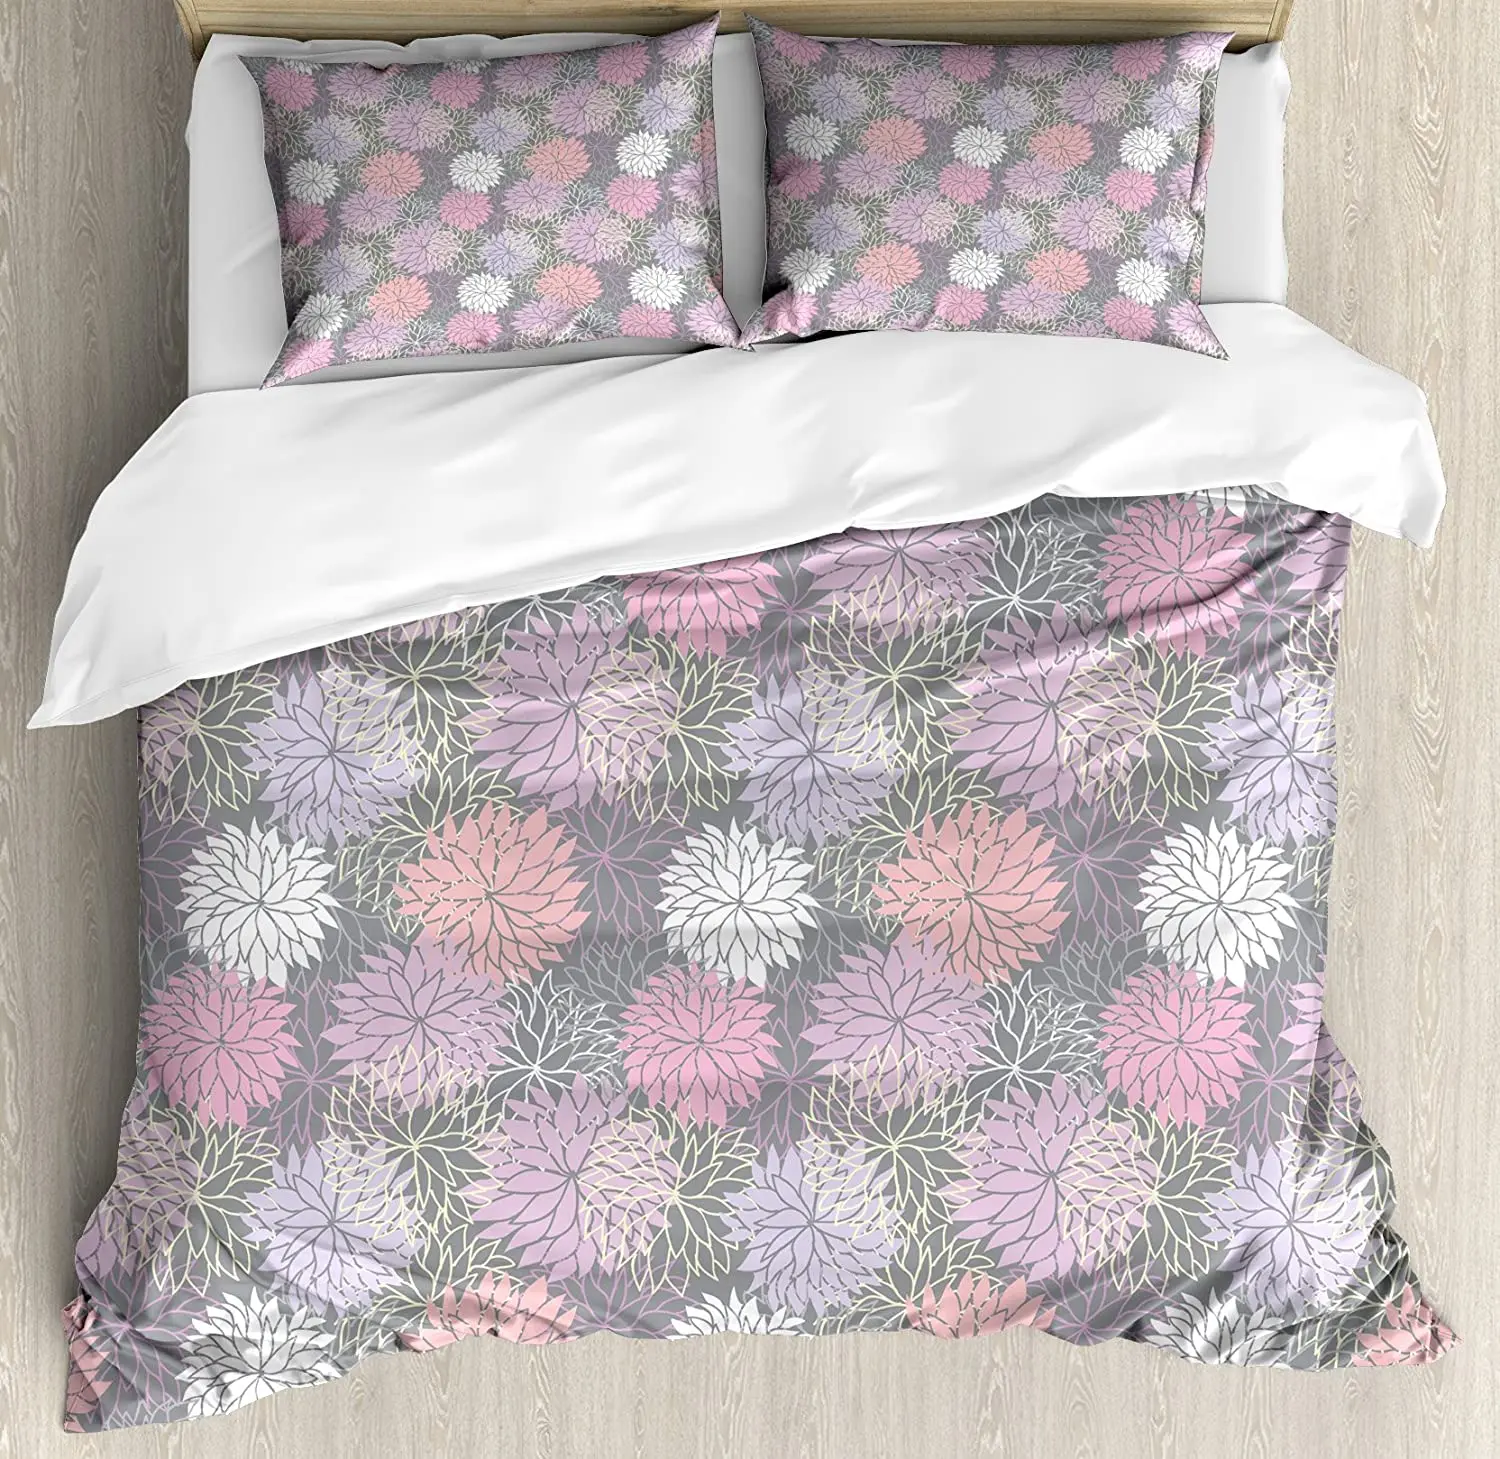 

Pink and Grey Bedding Set For Bedroom Bed Home Blossom Bouquet Botanical Foliage Shabby Ch Duvet Cover Quilt Cover Pillowcase